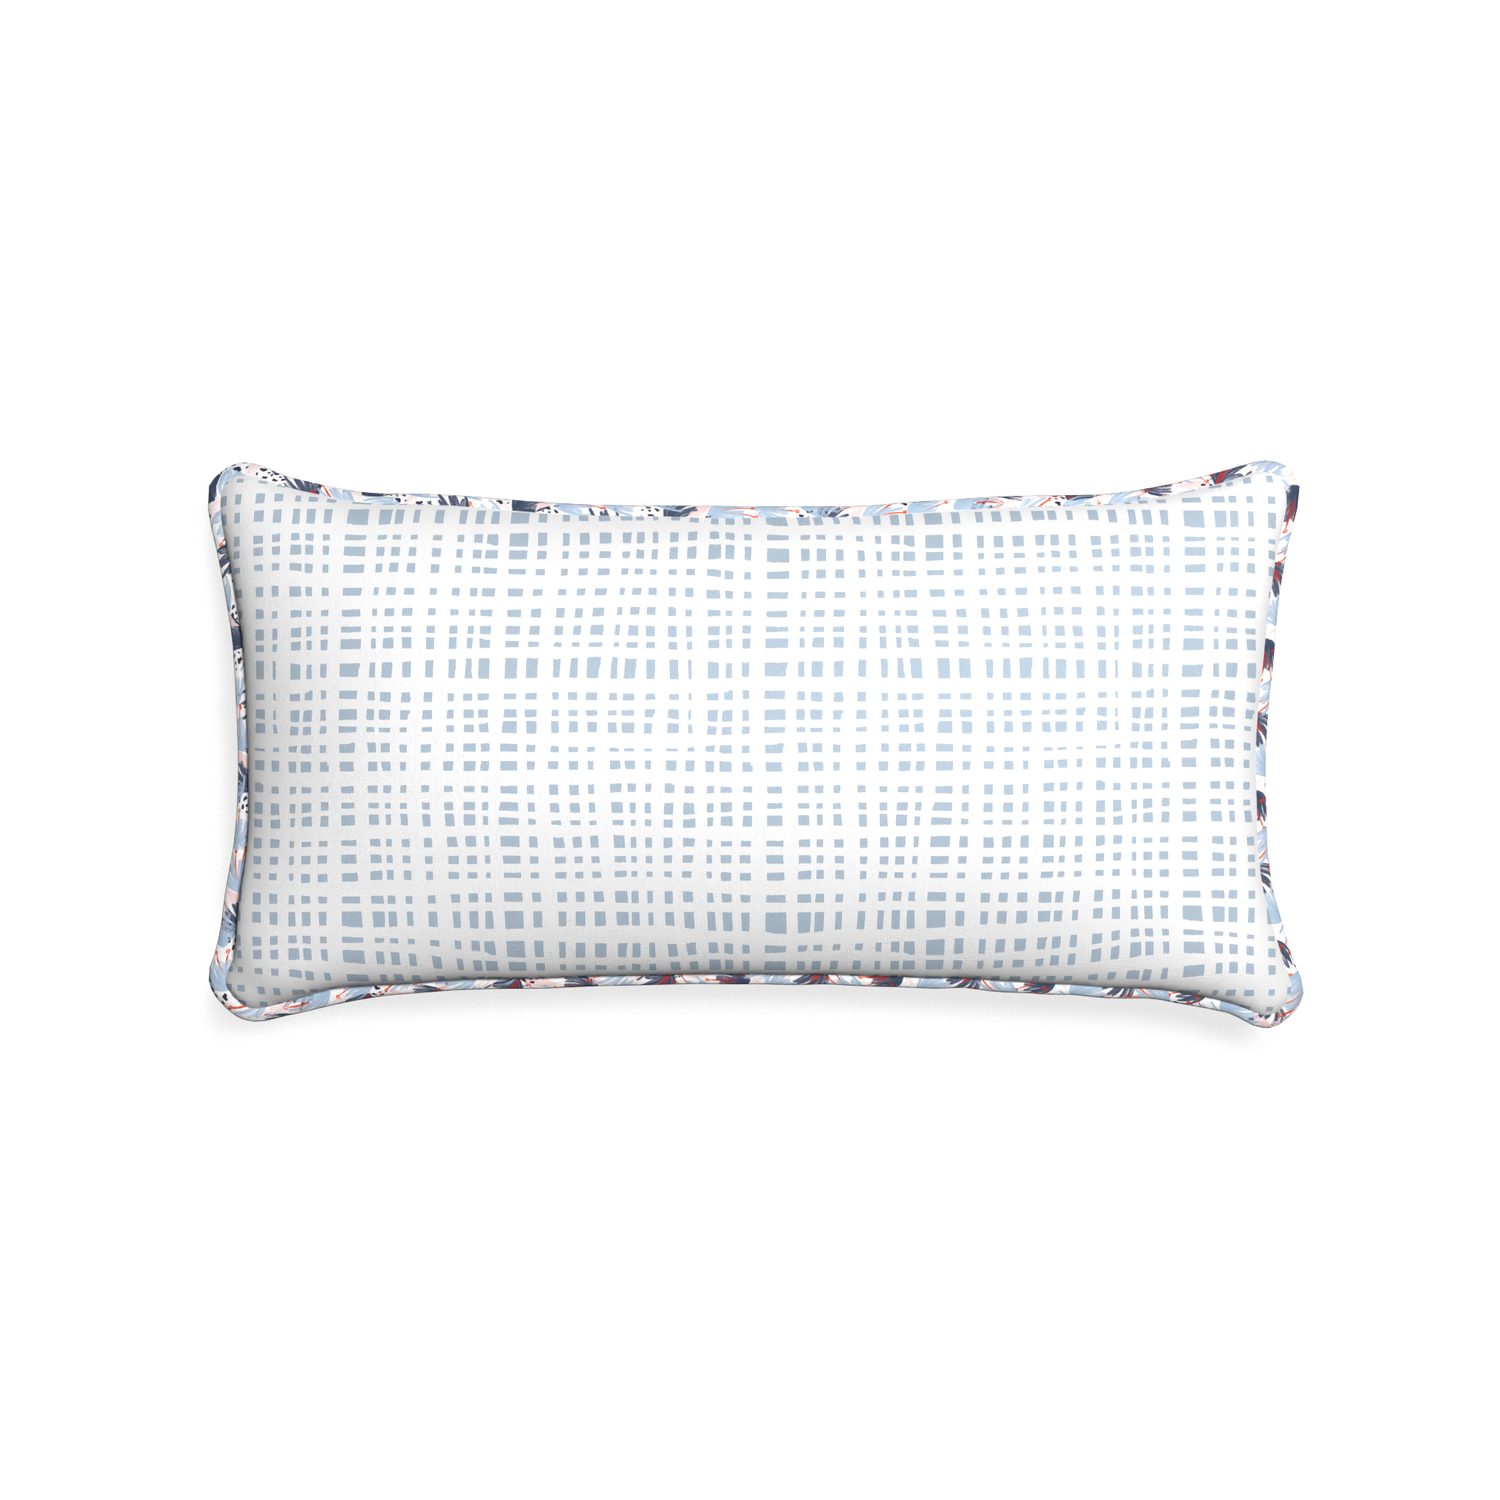 Midi-lumbar ginger custom plaid sky bluepillow with e piping on white background